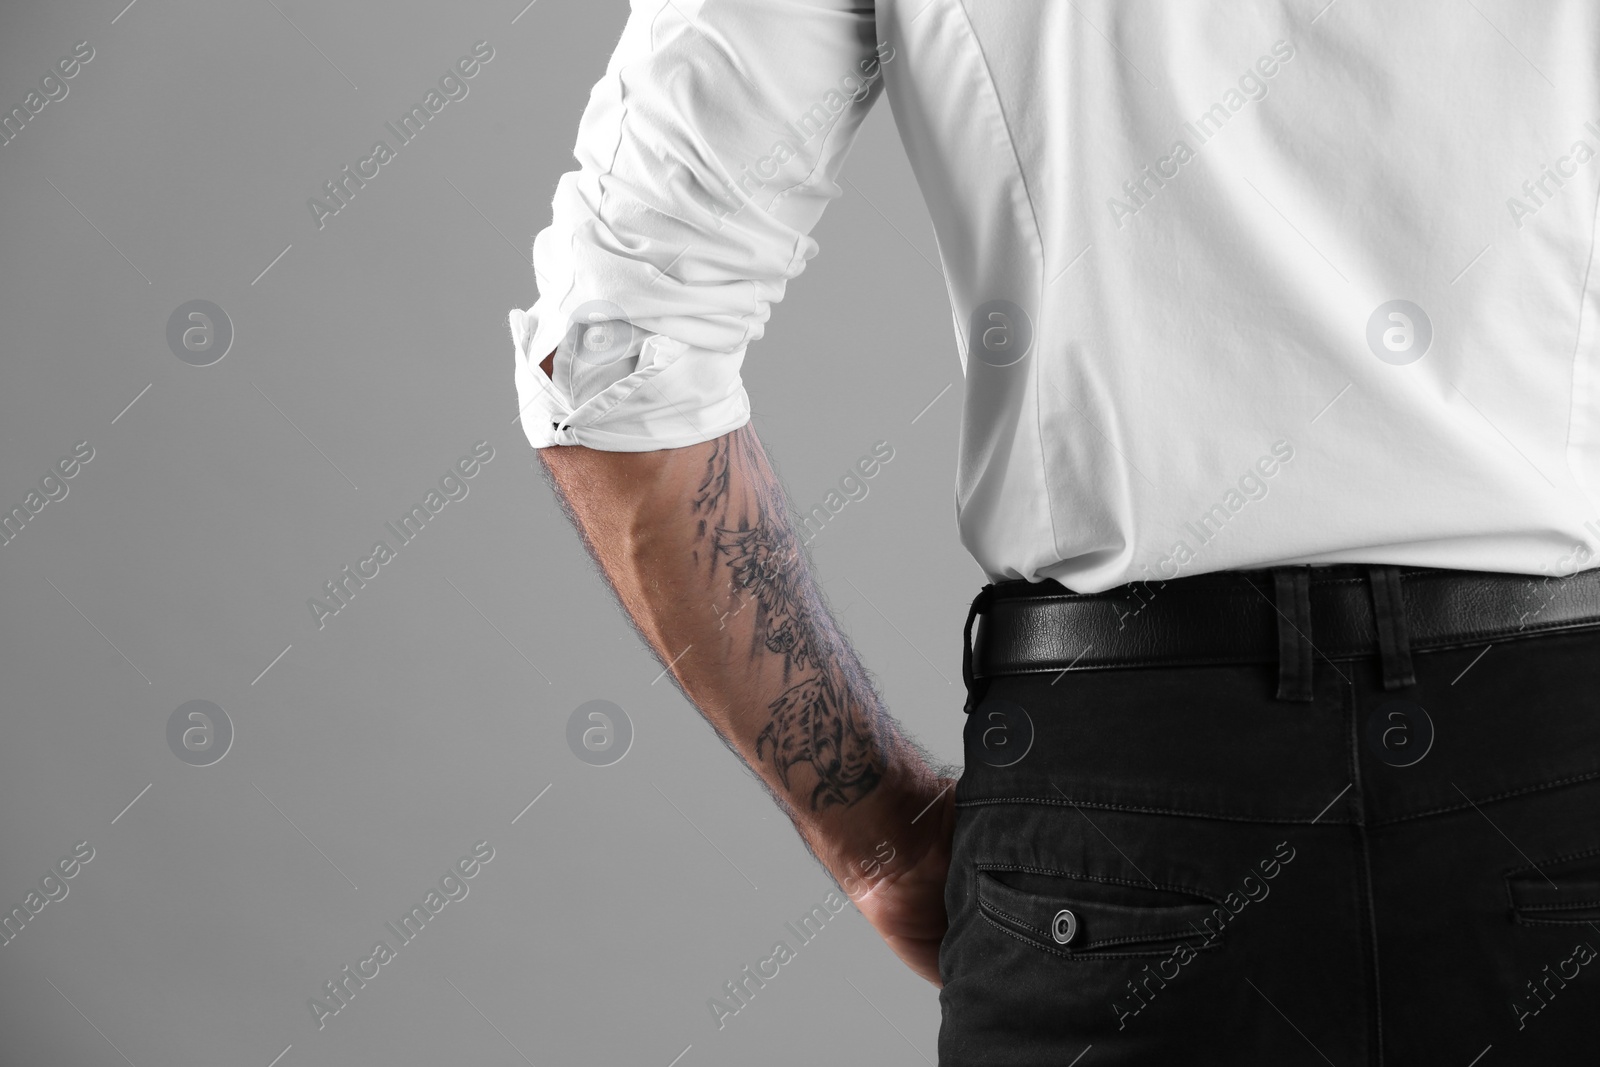 Photo of Tattooed man on grey background, closeup view. Space for text